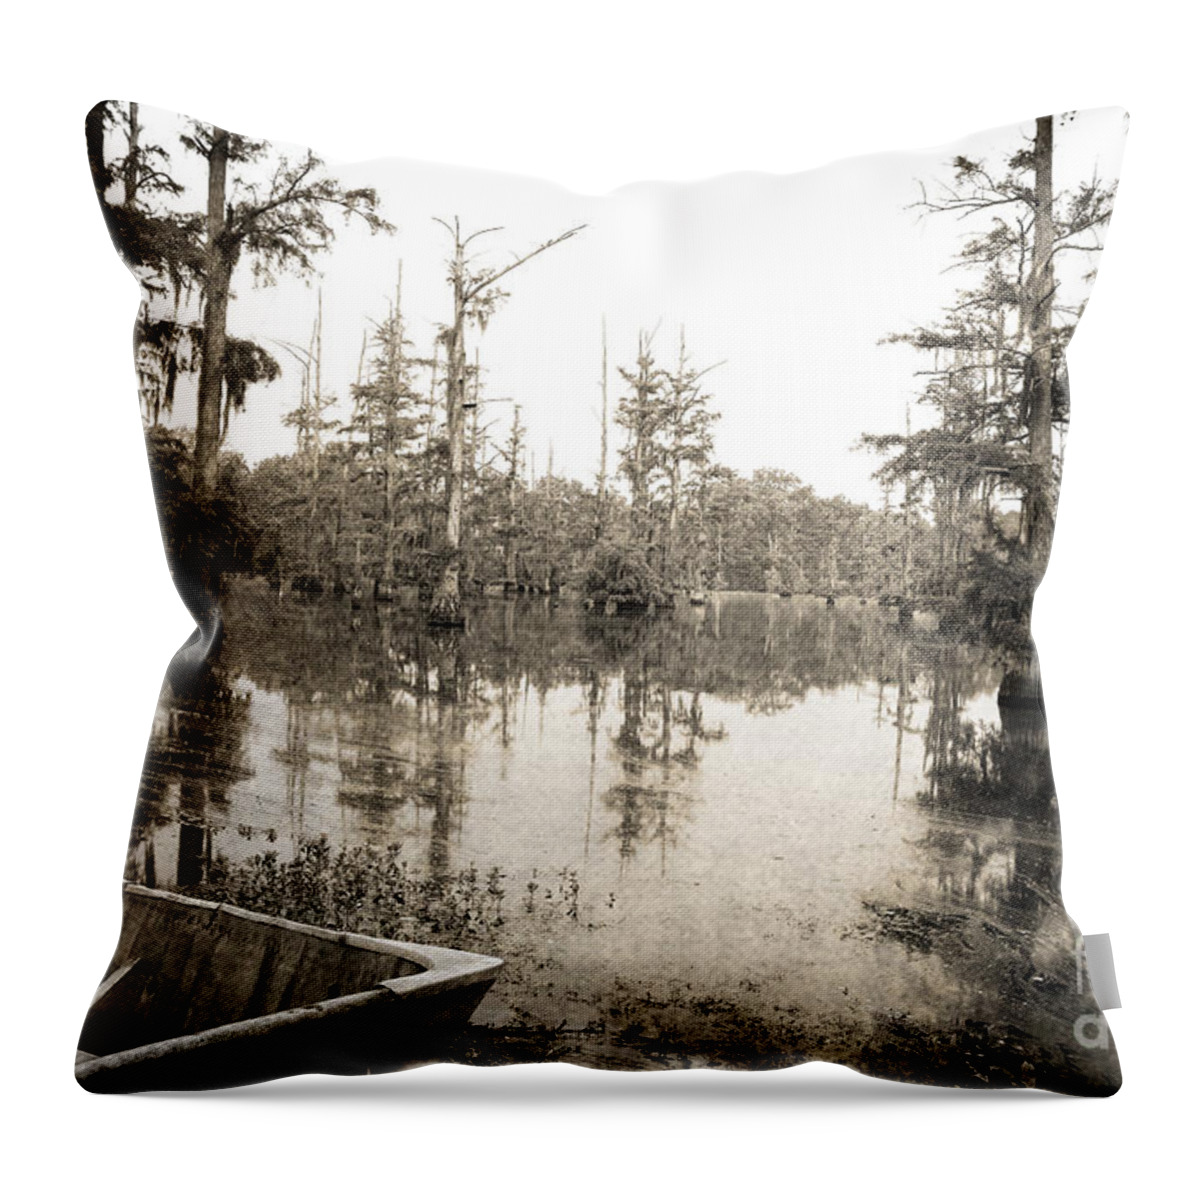 Swamp Throw Pillow featuring the photograph Cypress Swamp -sepia by Scott Pellegrin